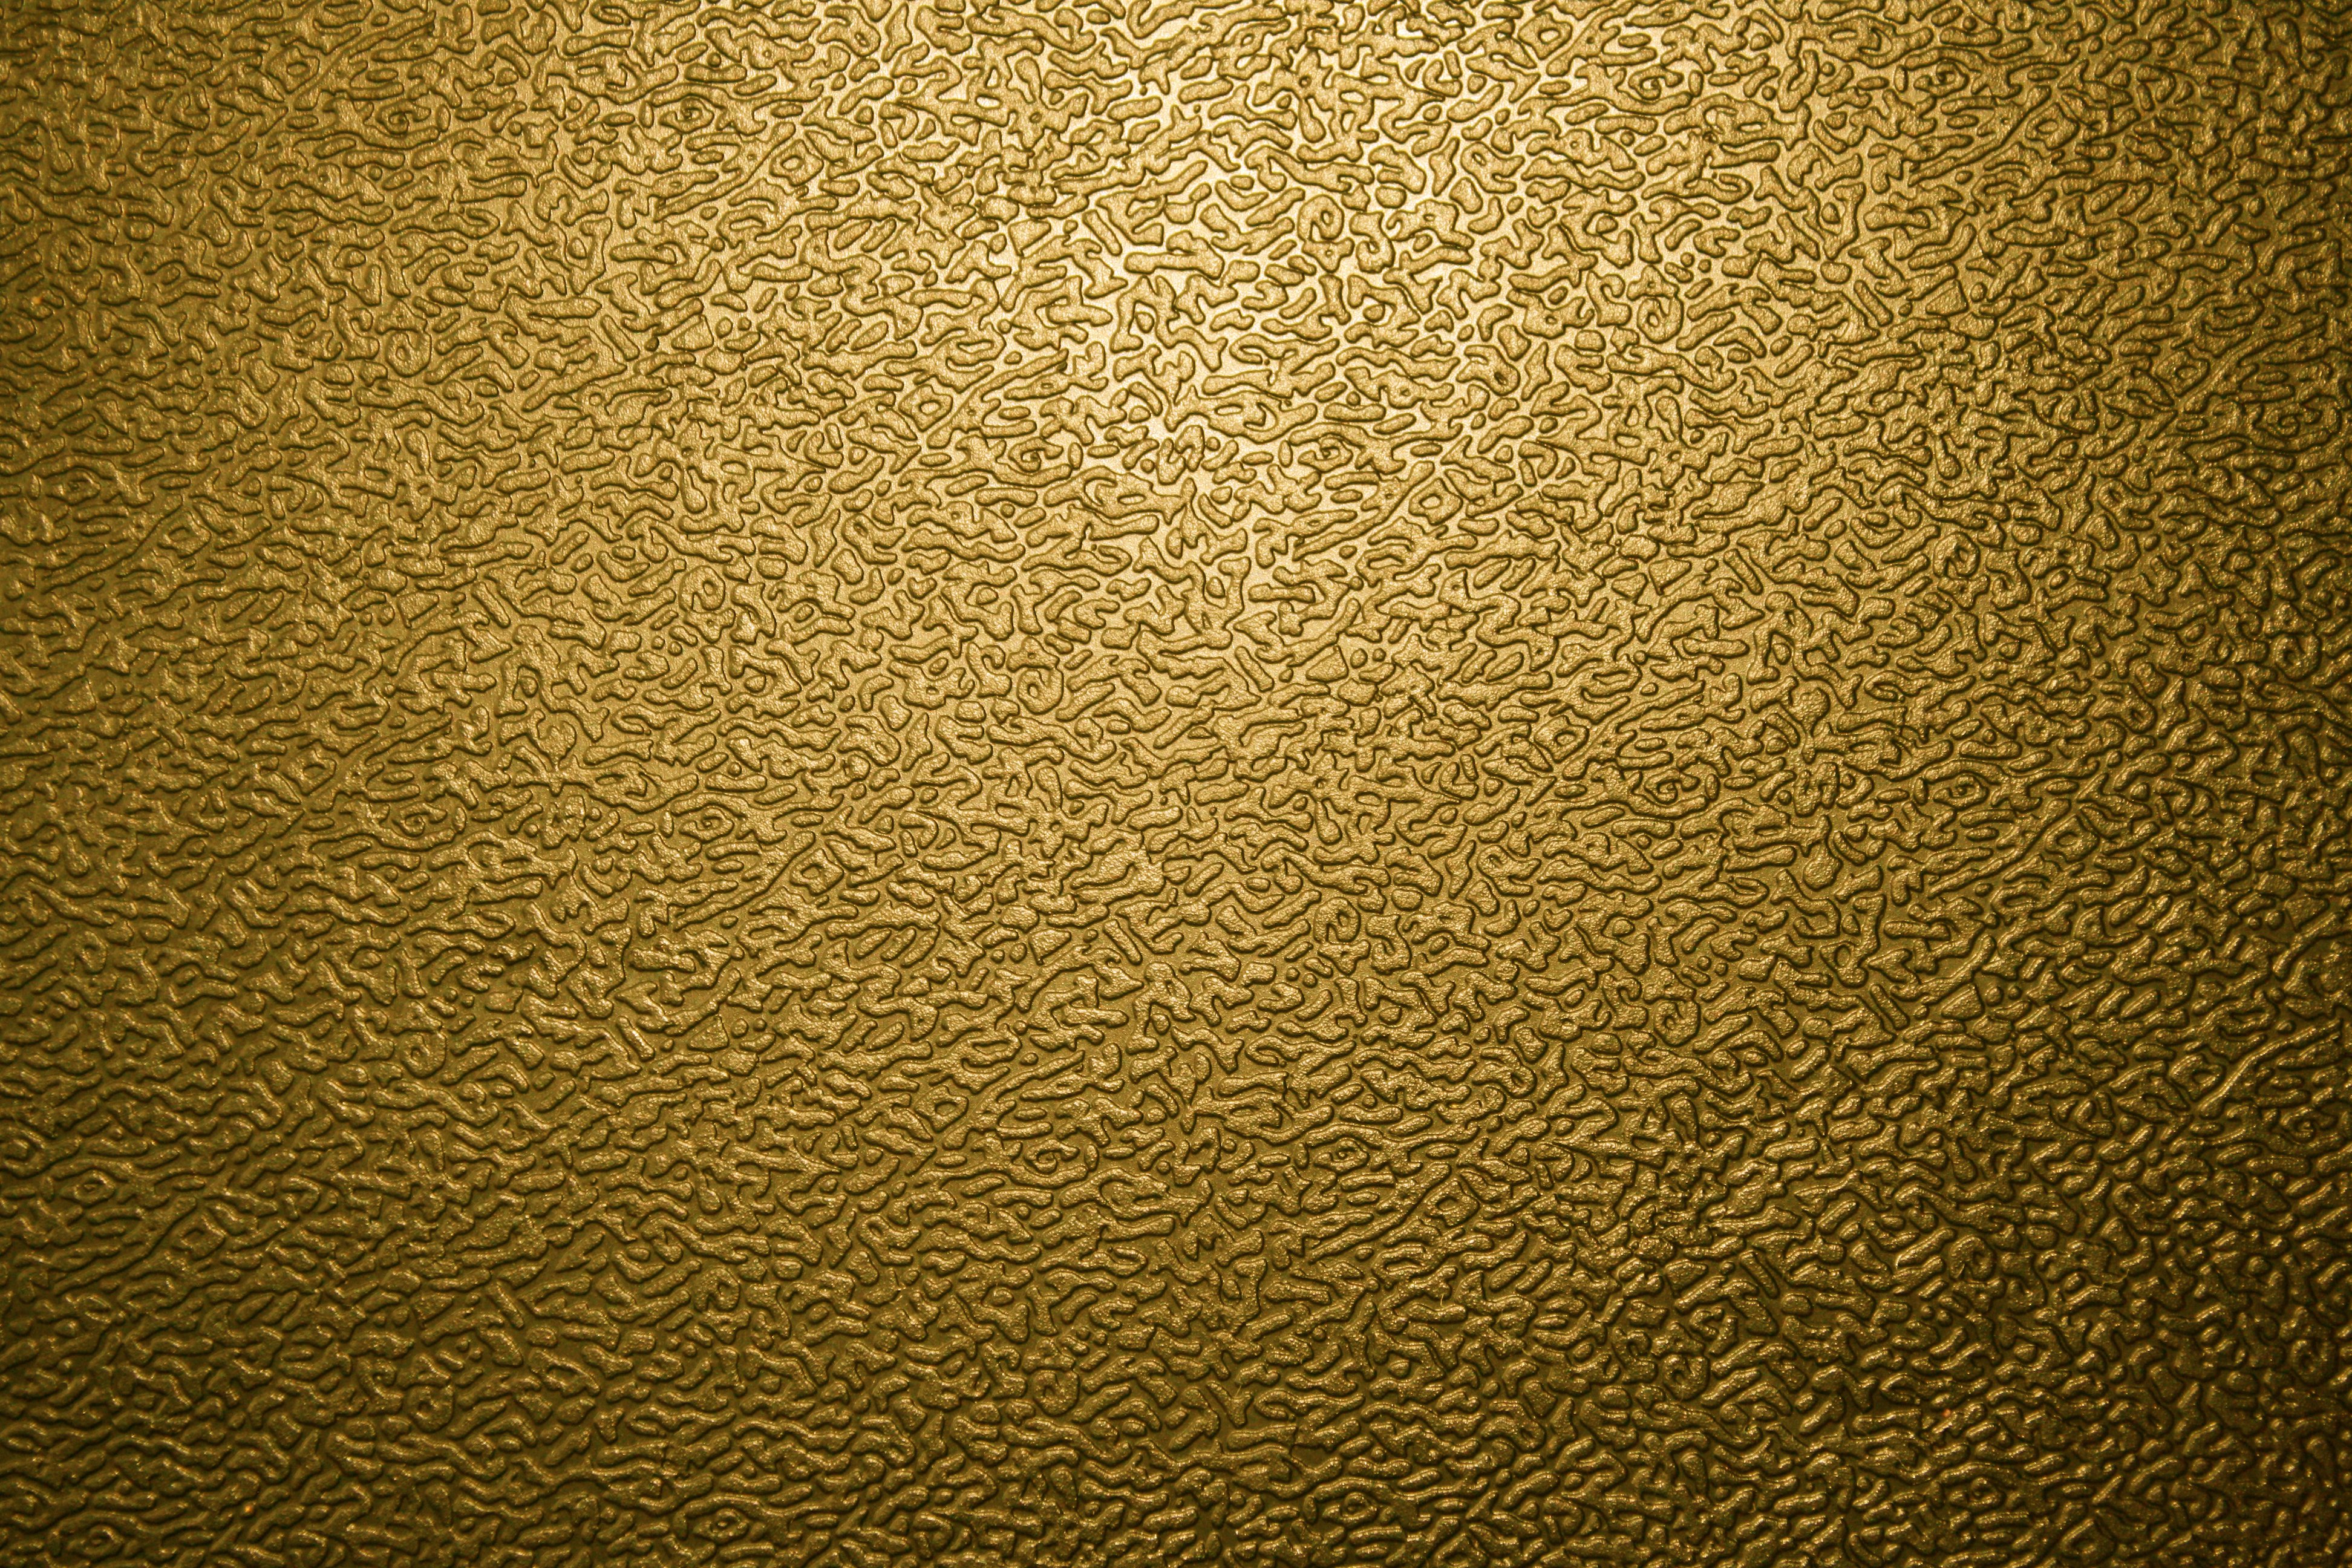 Textured Gold Plastic Close Up Picture Photograph Photos